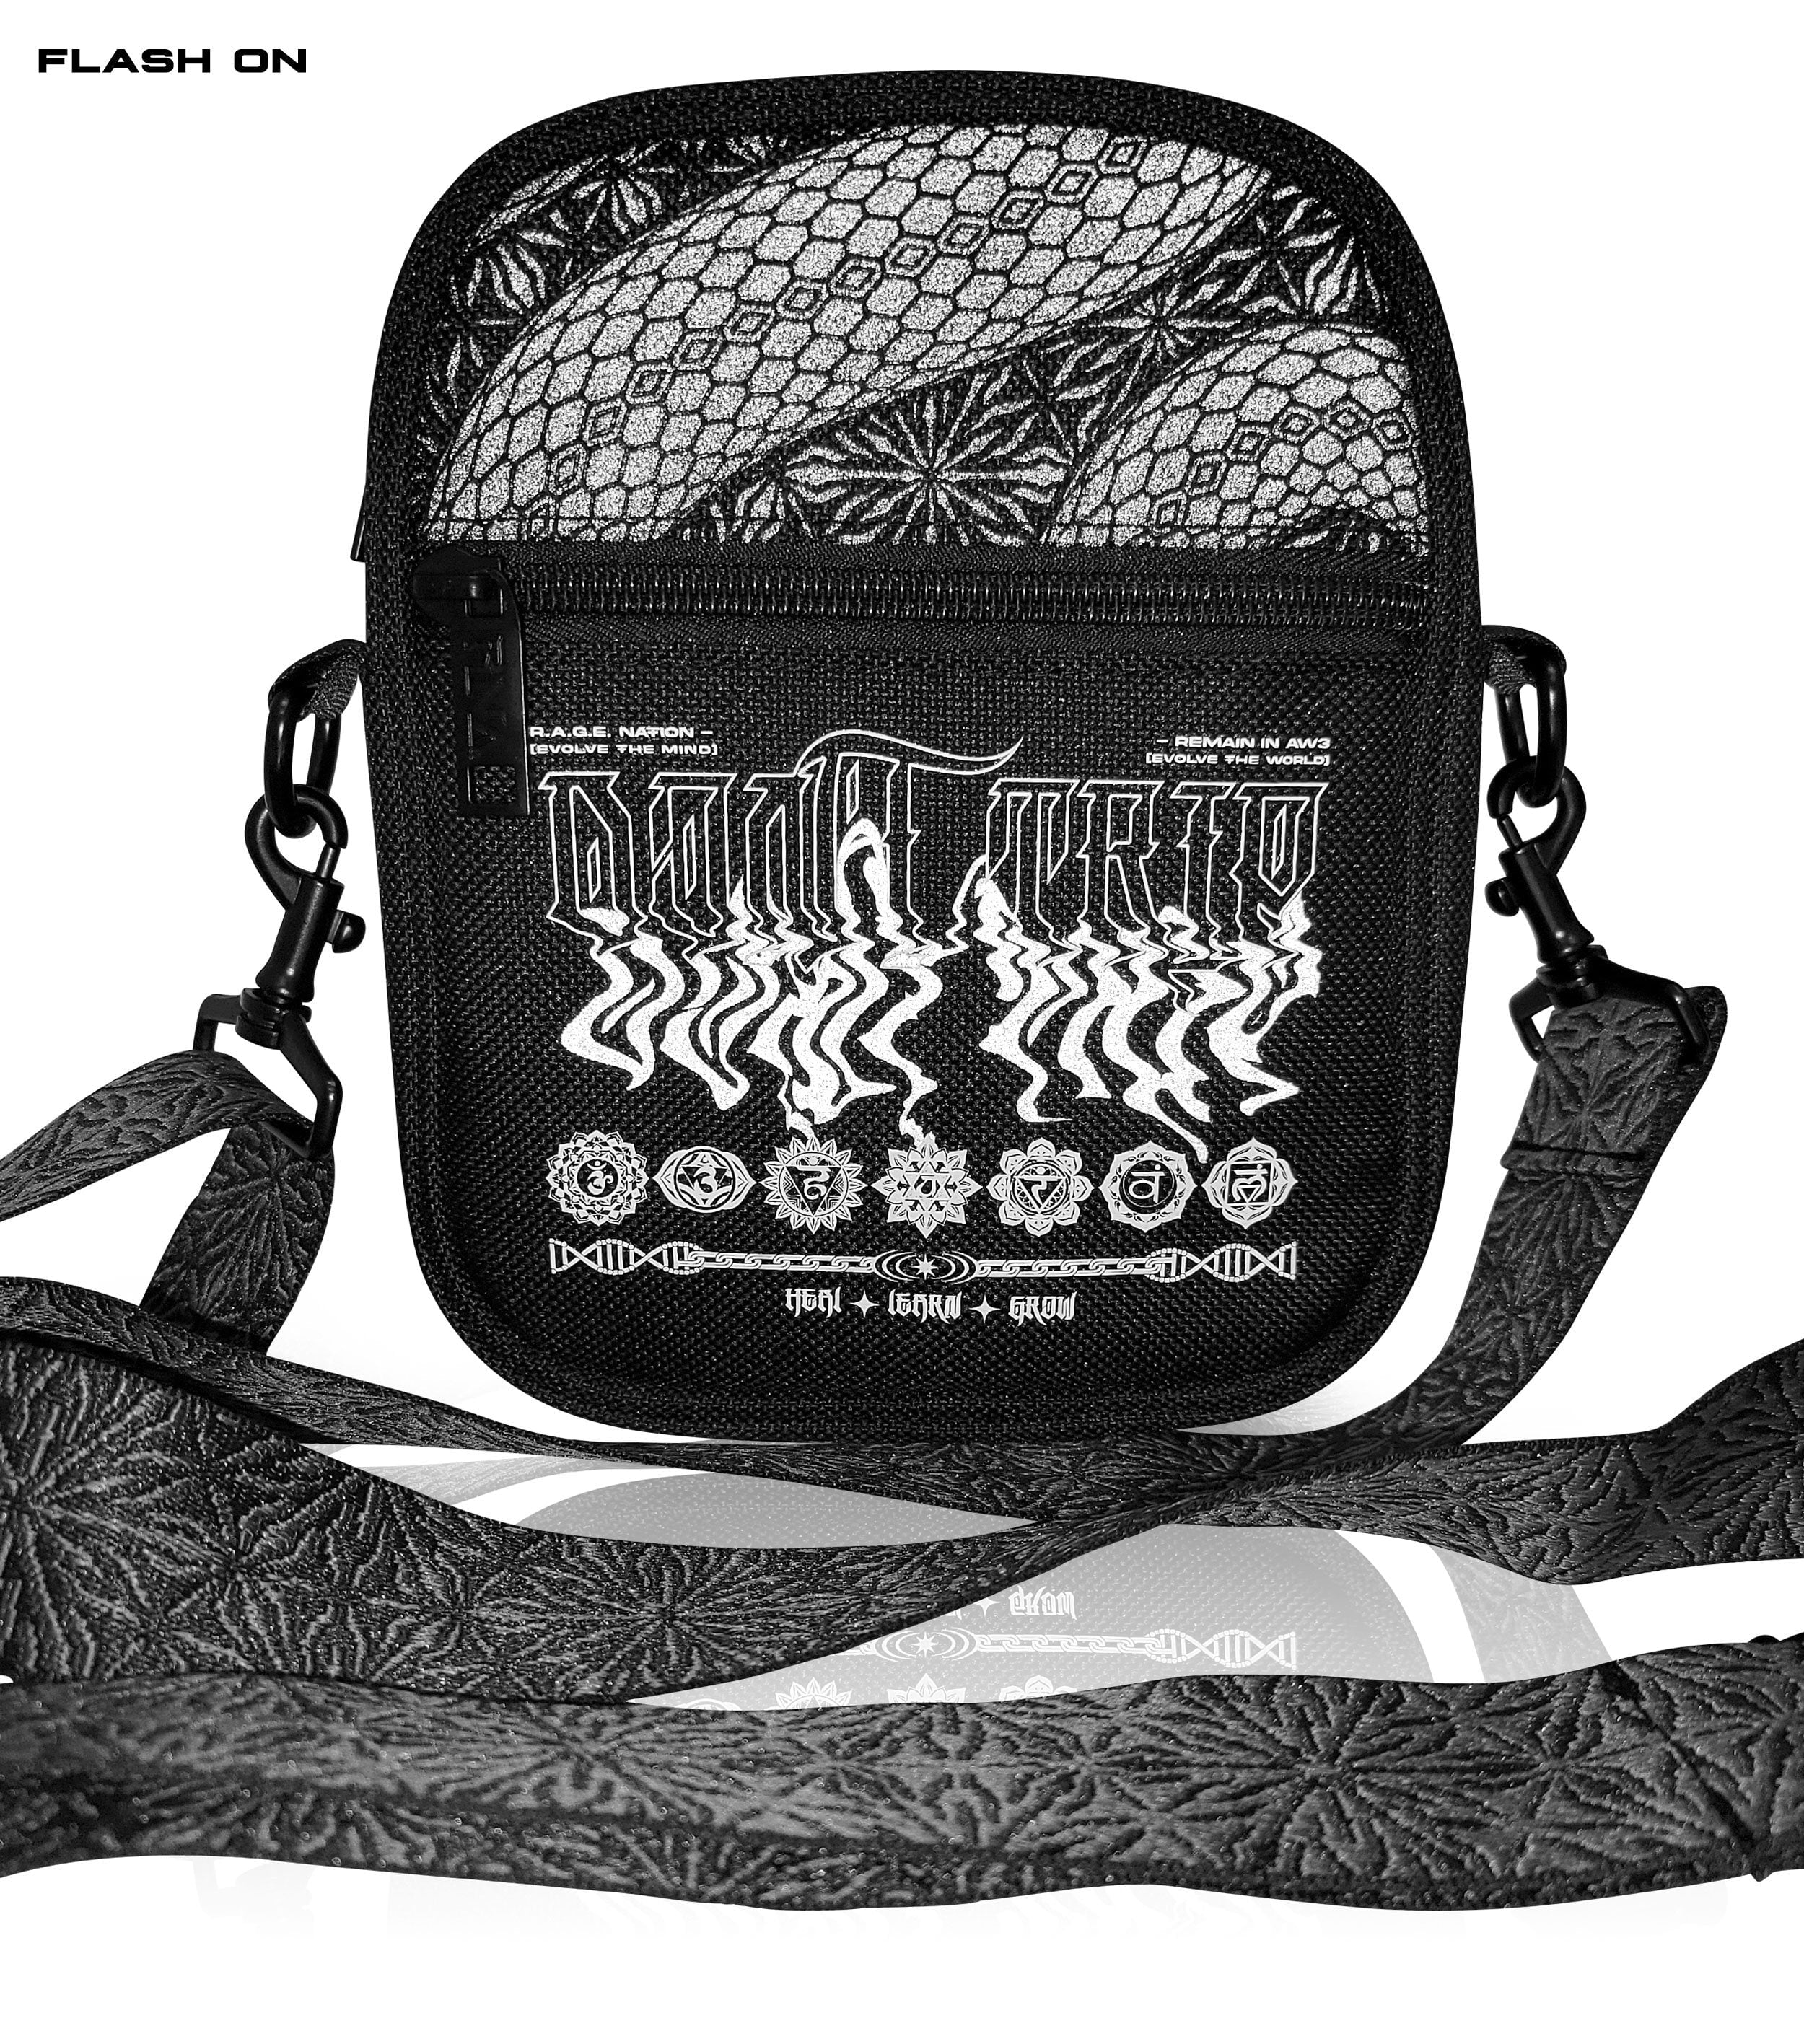 WAREHOUSE SCORE • DON'T TRIP • Double-Sided • Reflective Shoulder Bag 